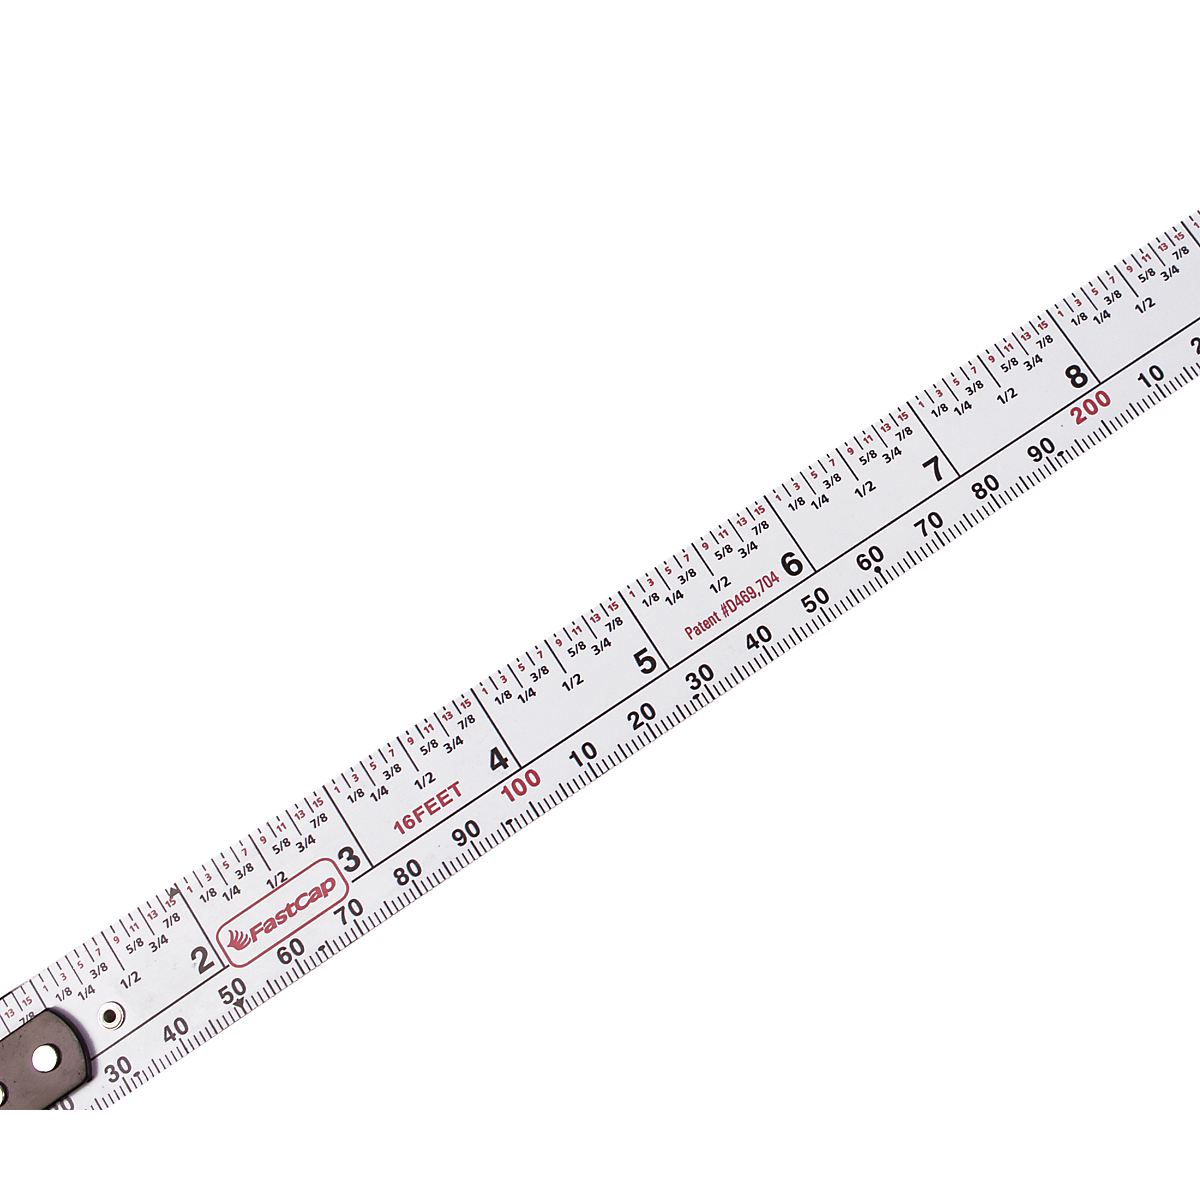 https://rowleycompany.scene7.com/is/image/rowleycompany/rowley-flexi-tape-measure-closeup-dt16?$s7Product$&fmt=png